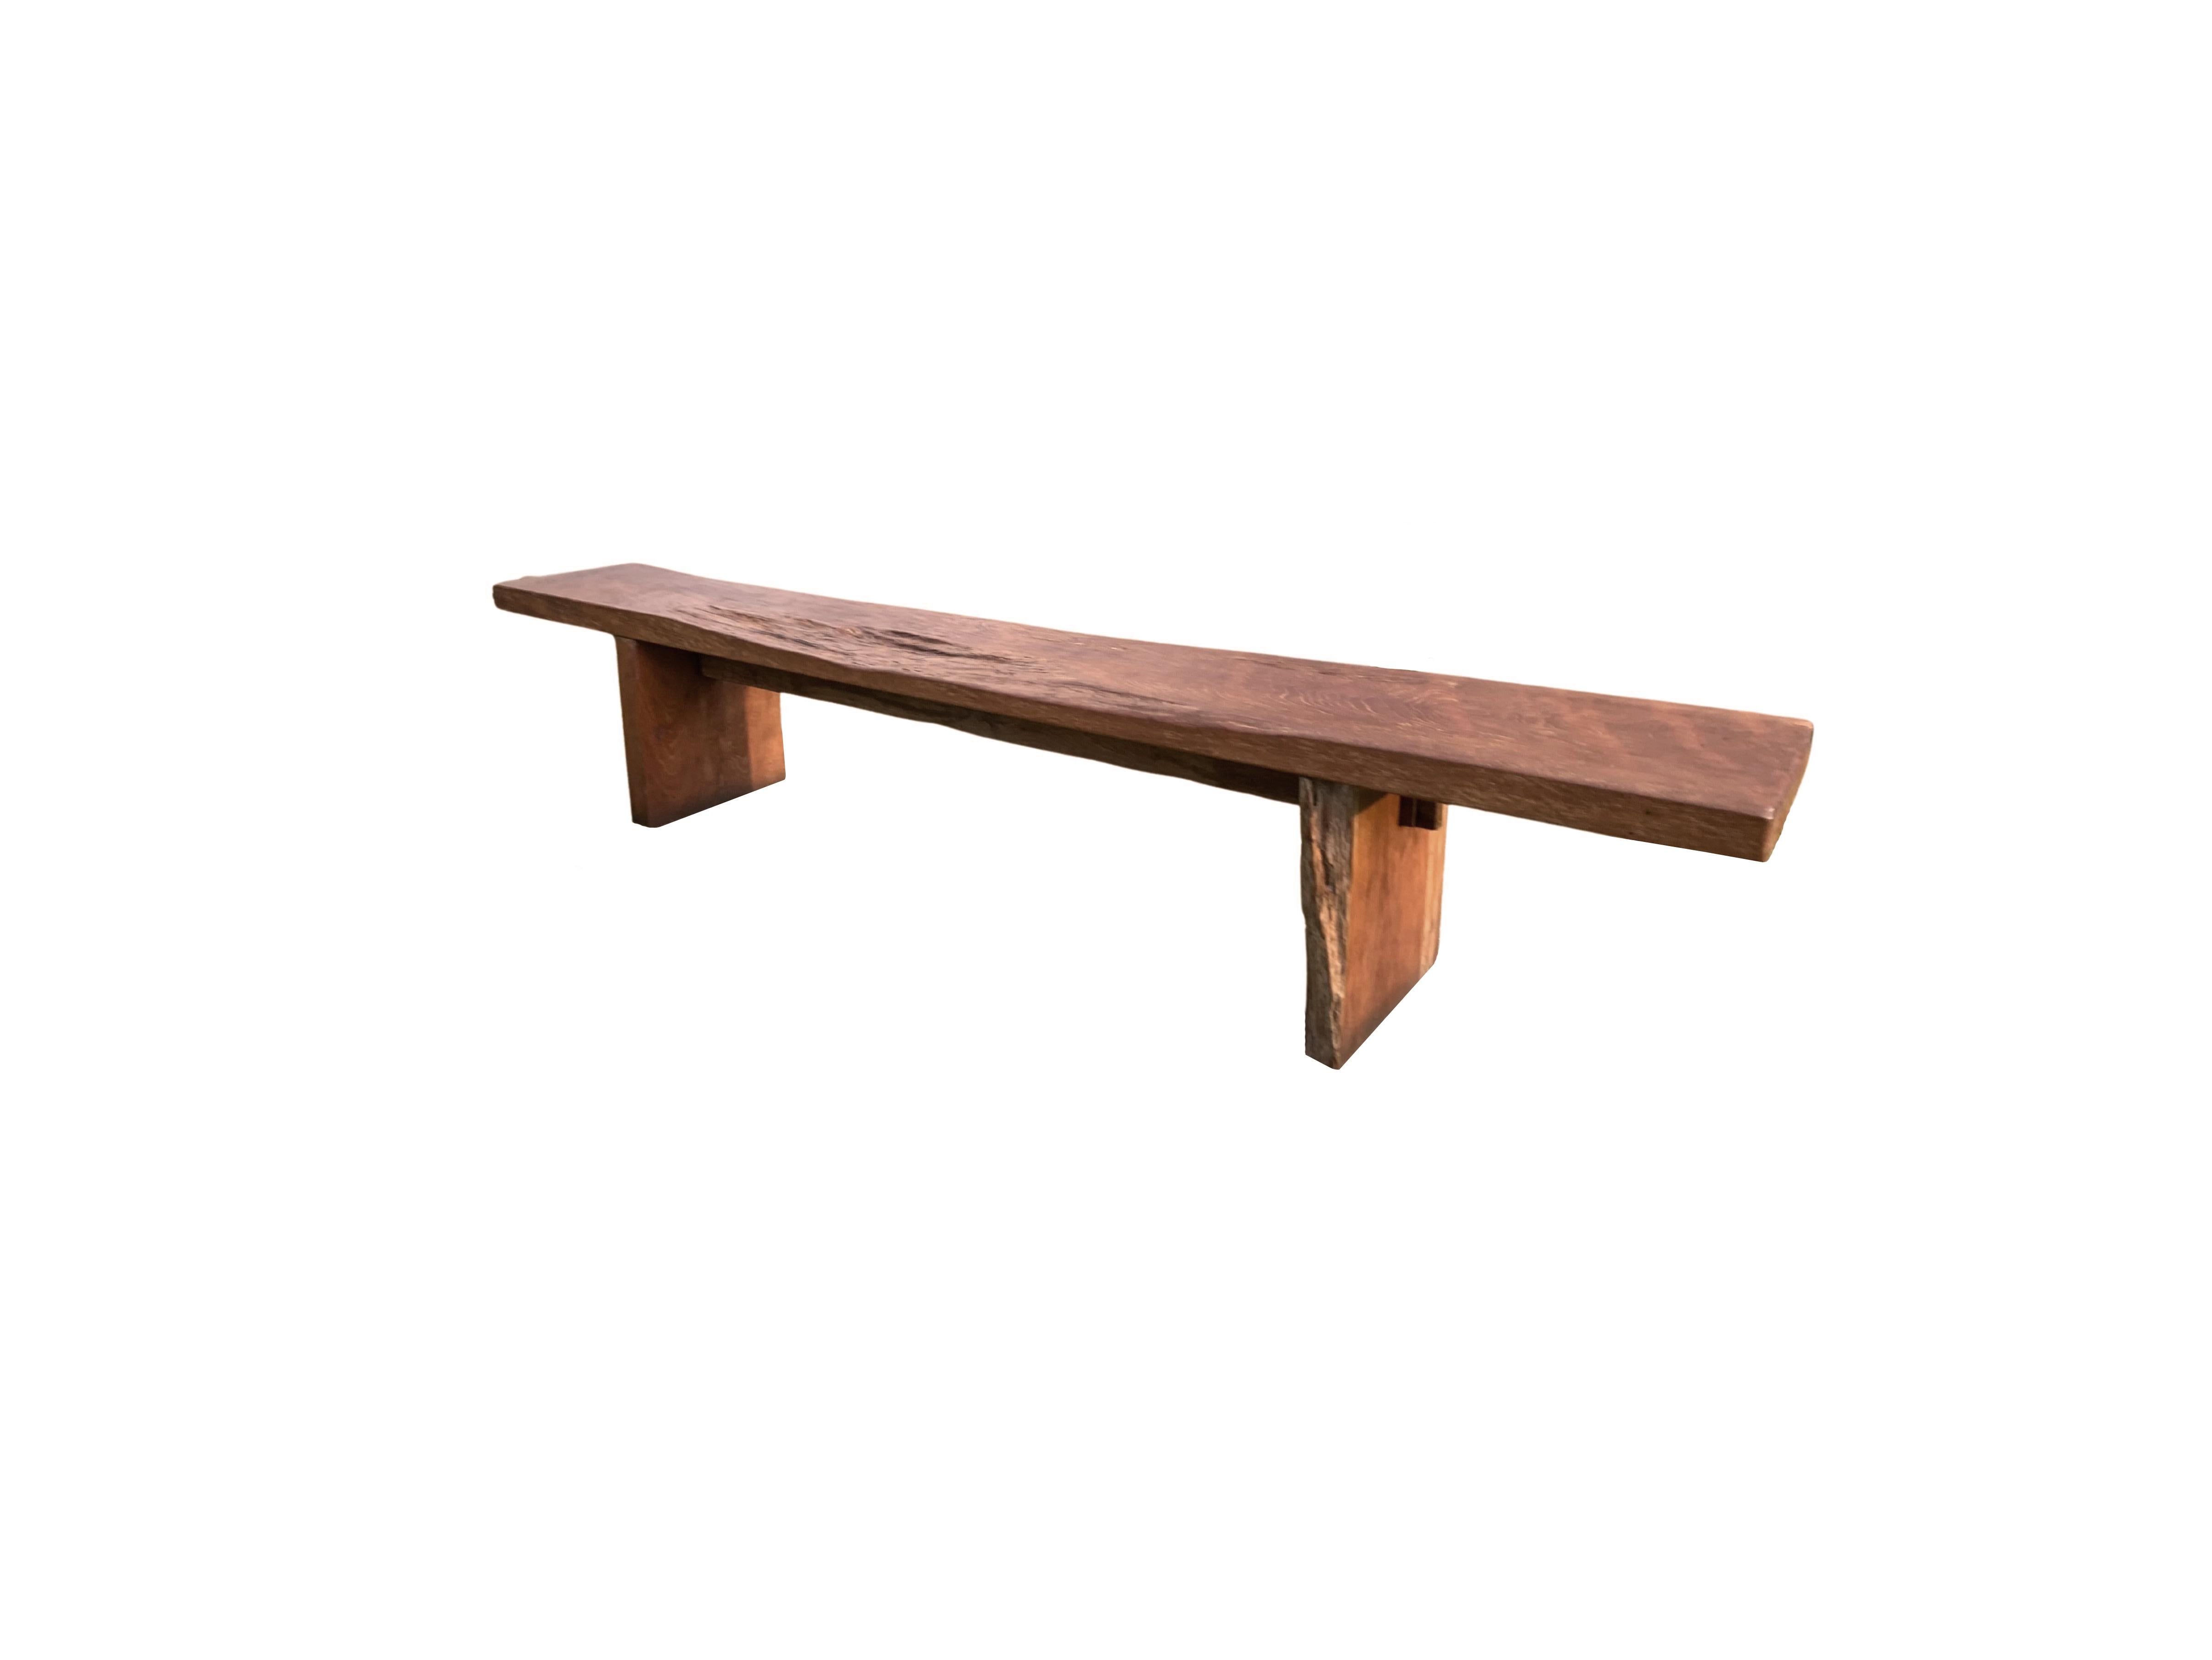 This solid teak wood bench originates from the Island of Madura, off the coast of Northeastern Java. It features a wonderful organic form with a mix of wood textures and shades. The seat was carved from a single block of teak wood and has been given